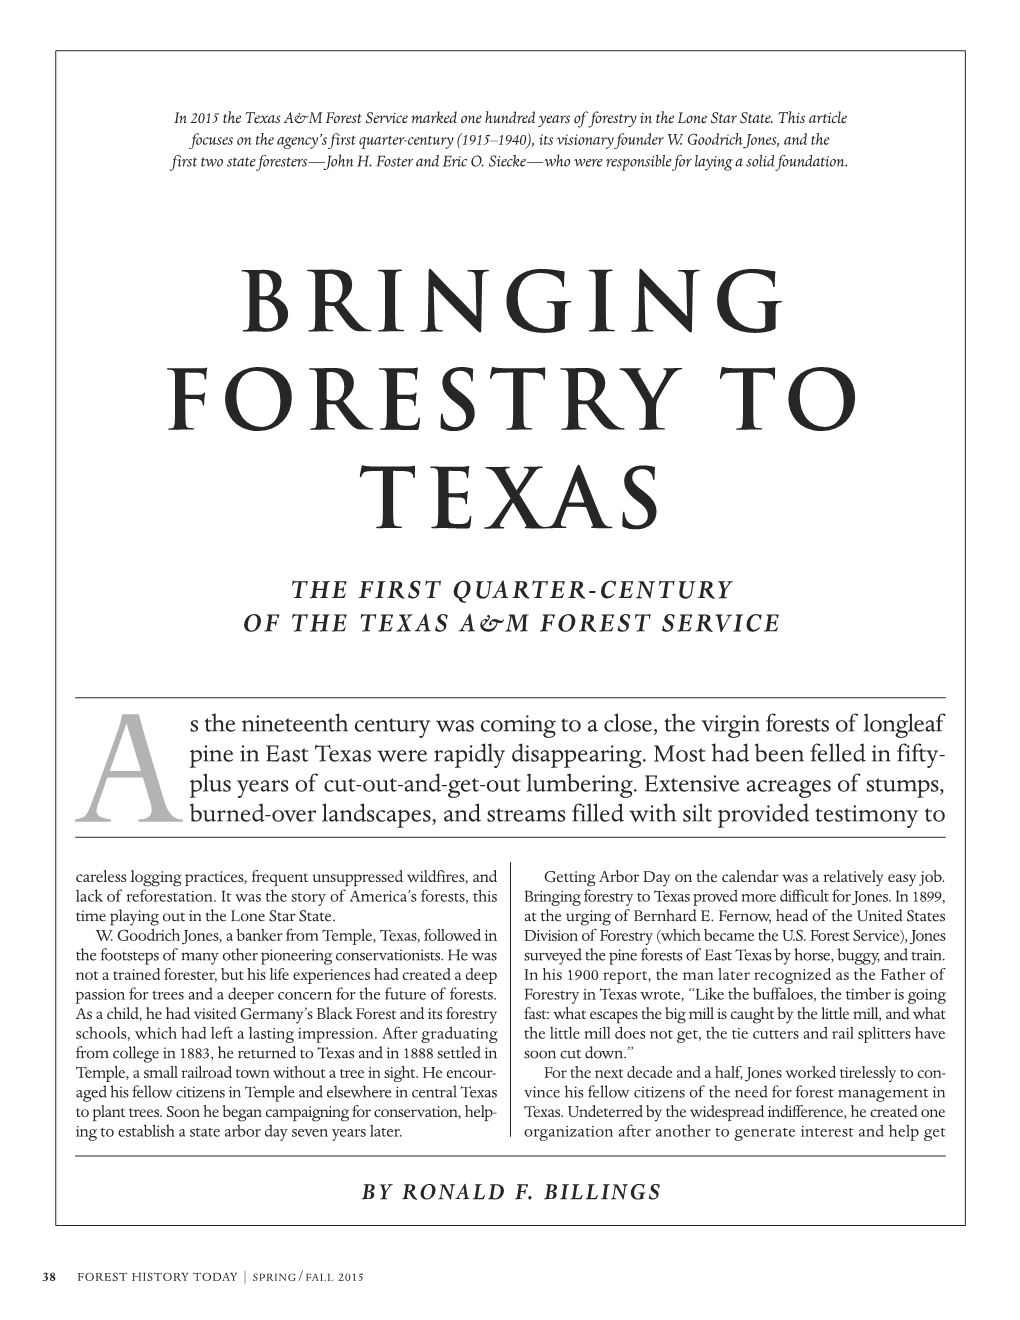 Bringing Forestry to Texas